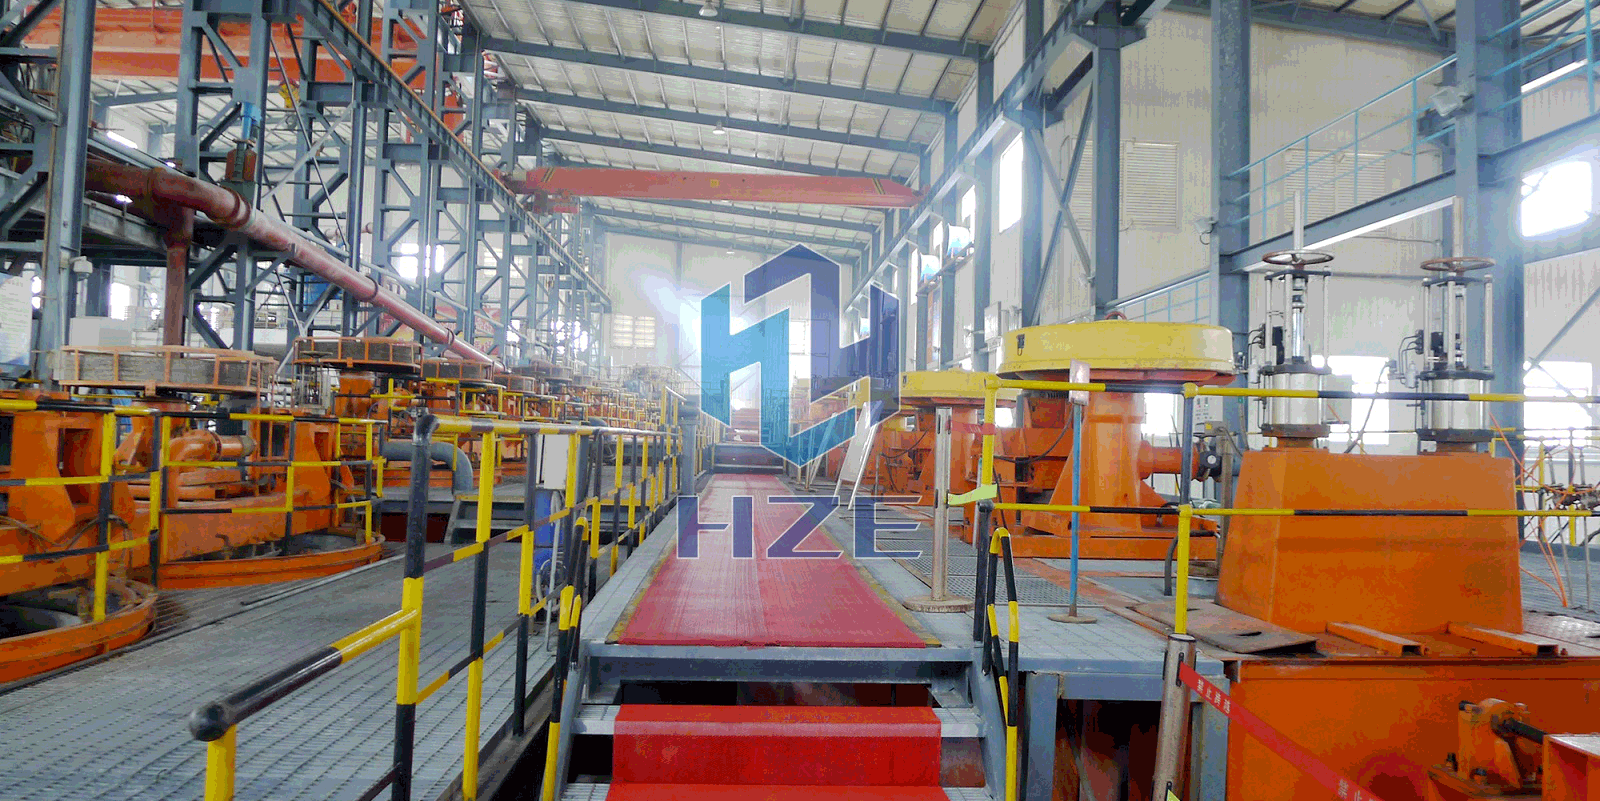 Technical Transformation of Existing Mineral Processing Plant